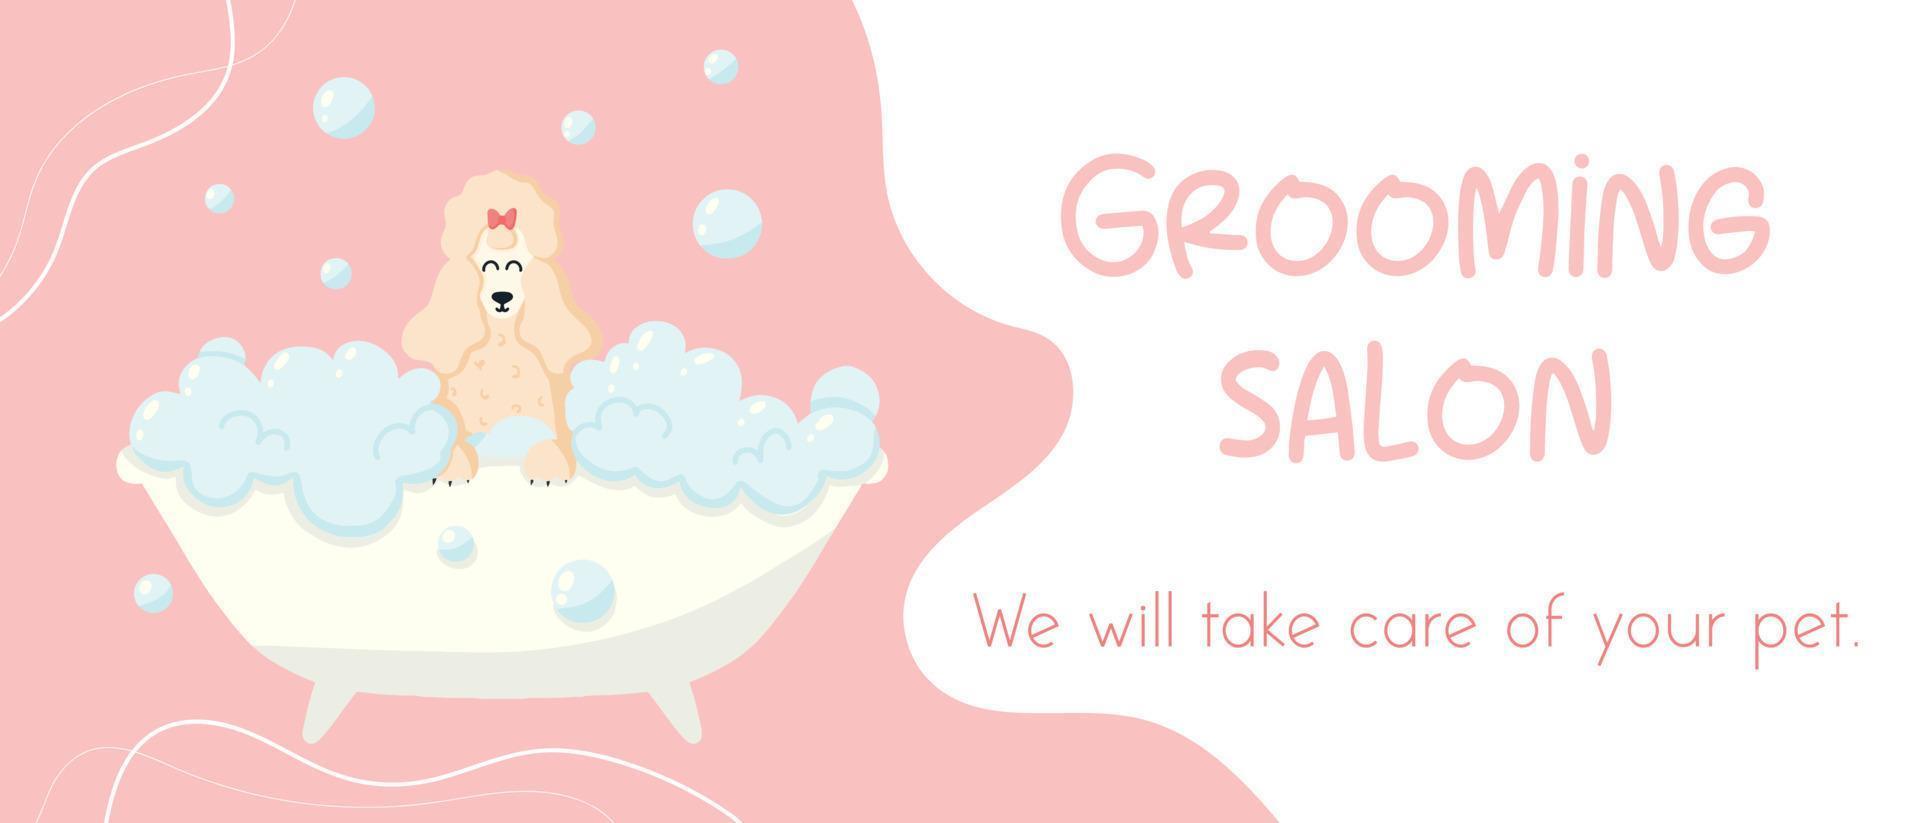 Grooming salon. Banner for grooming salon. Vector illustration in cartoon style. Cute poodle in a bubble bath. Pet care.